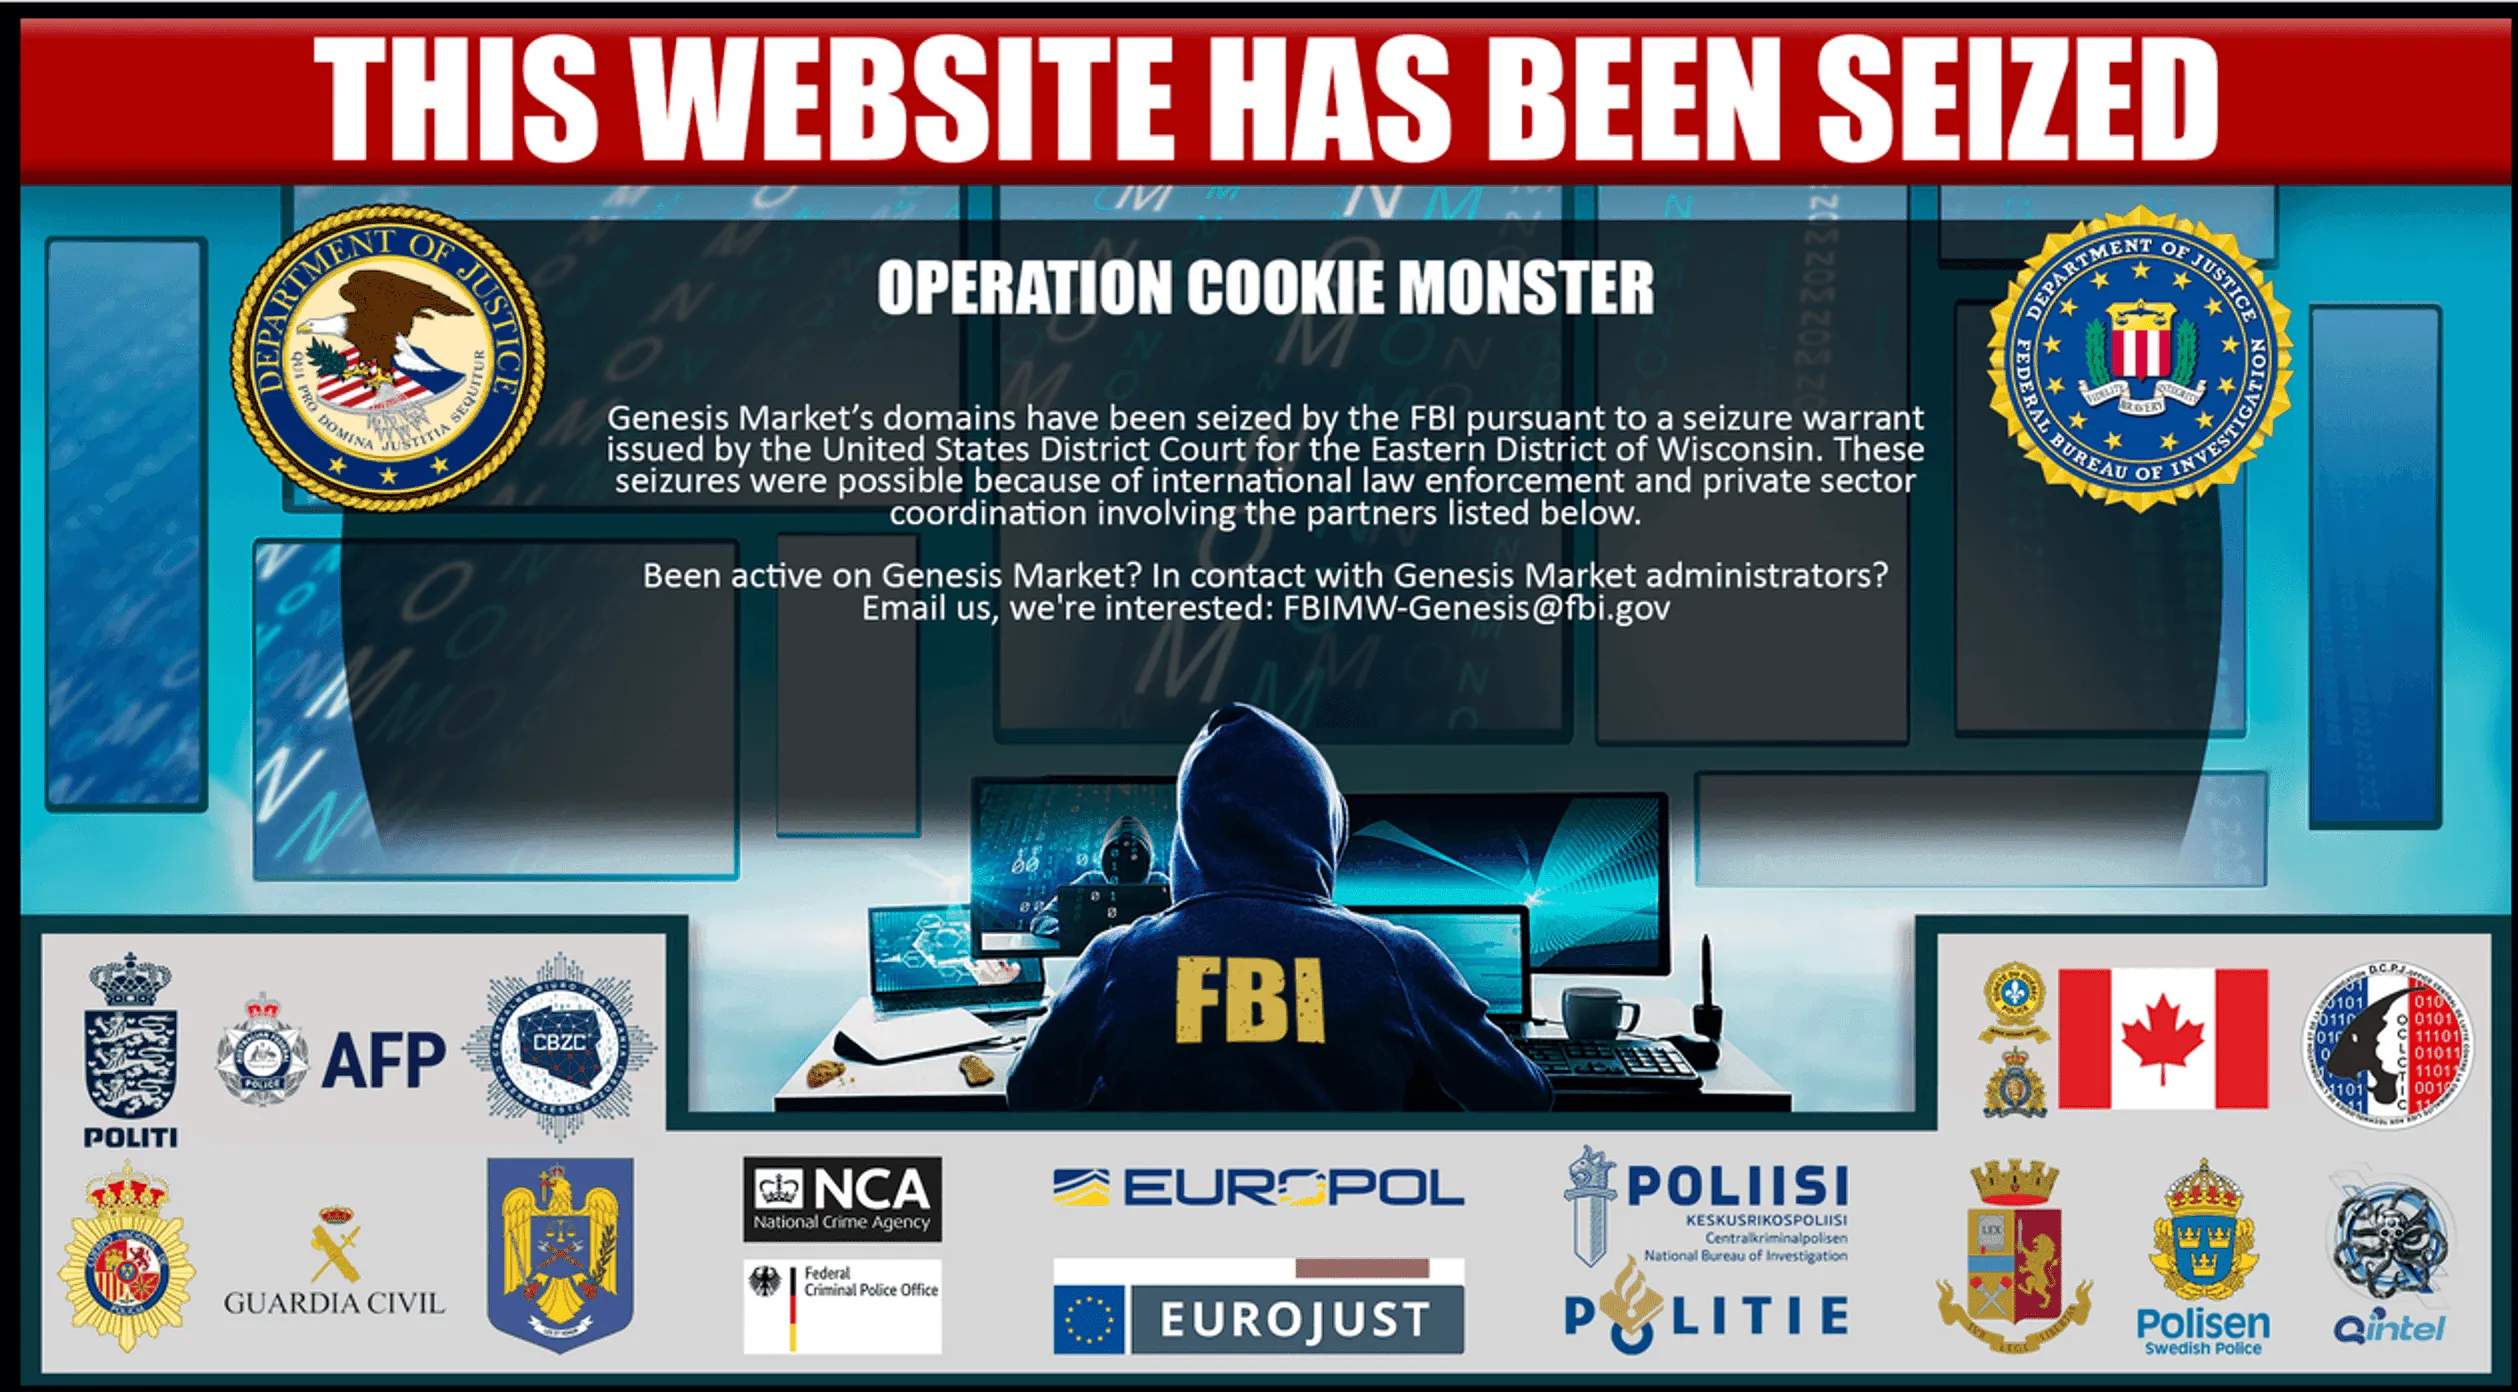 THE WARNING POSTED BY LAW ENFORCEMENT AFTER THE TAKEDOWN OF GENESIS MARKET.